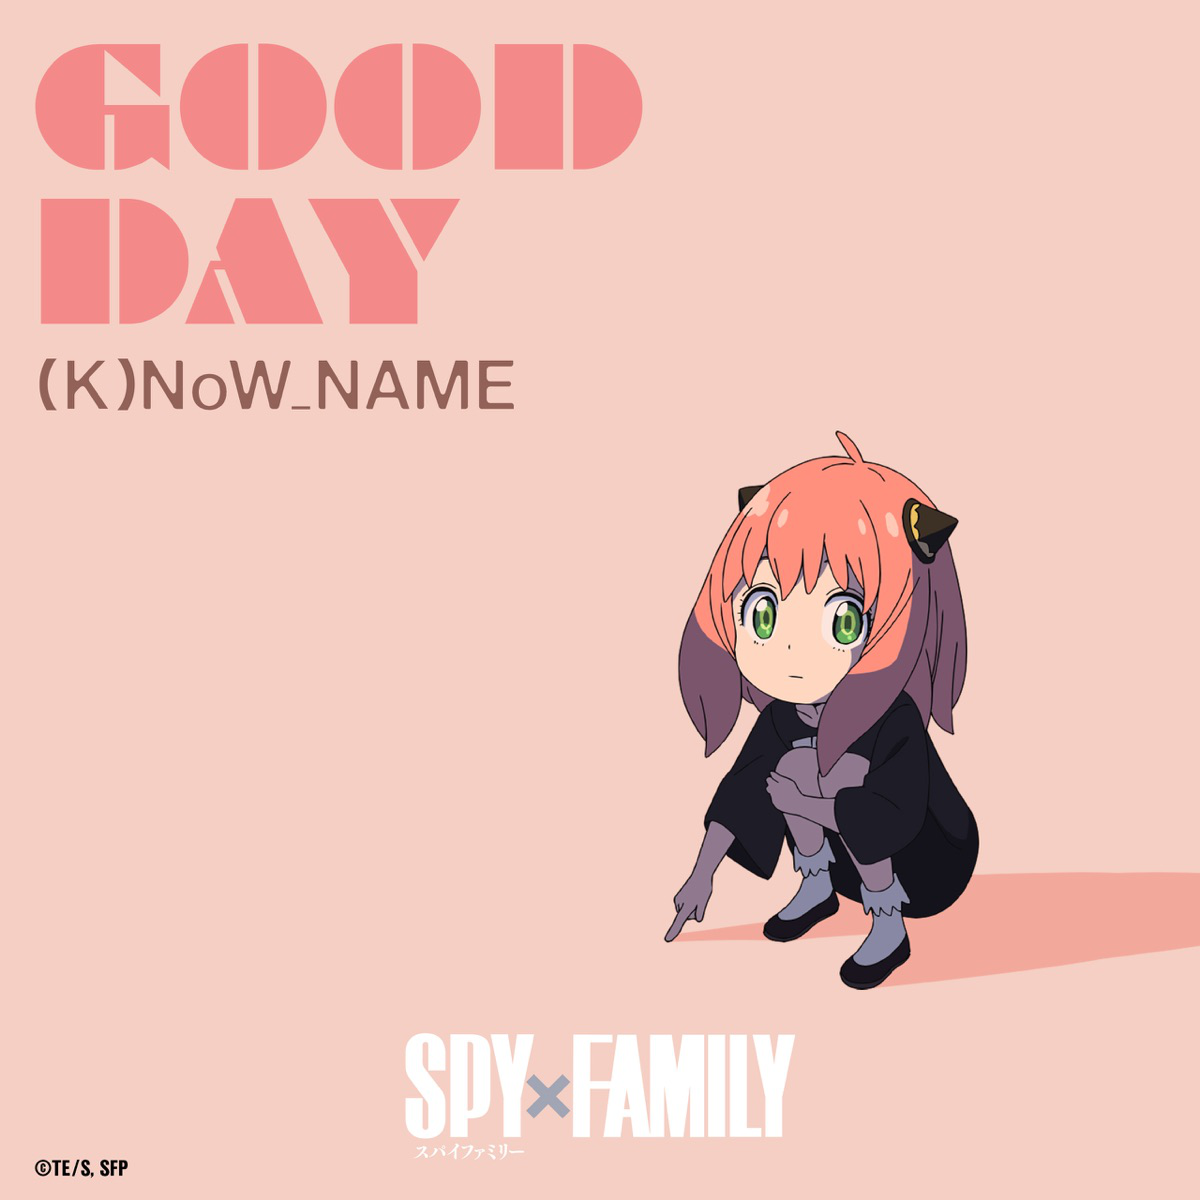 Our Favorite 'Spy x Family' Memes to Celebrate the Anime